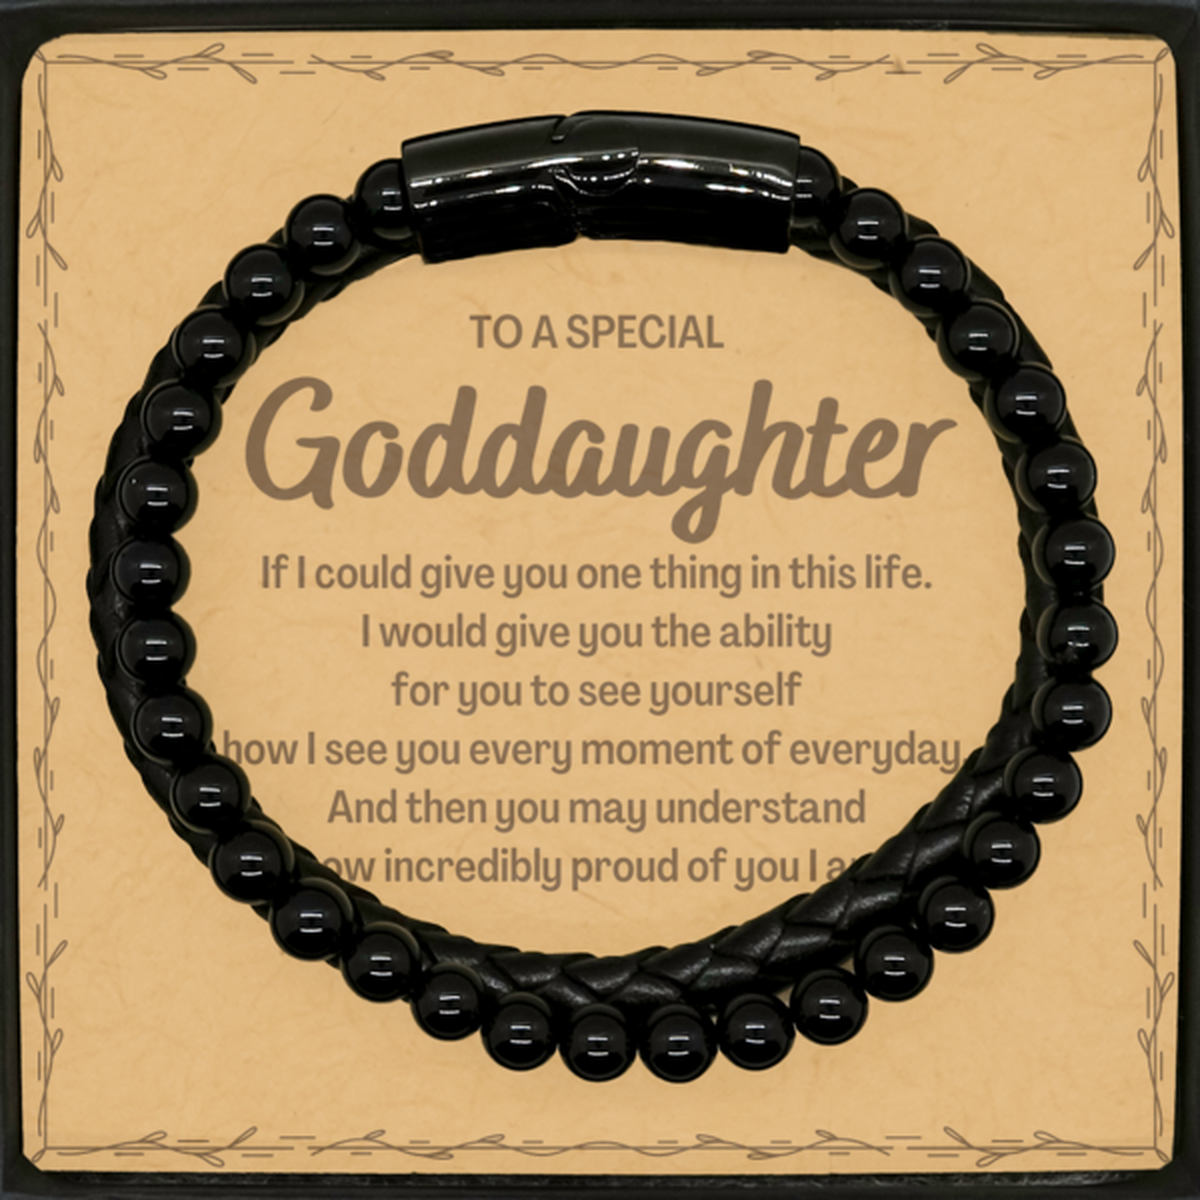 To My Goddaughter Stone Leather Bracelets, Gifts For Goddaughter Message Card, Inspirational Gifts for Christmas Birthday, Epic Gifts for Goddaughter To A Special Goddaughter how incredibly proud of you I am